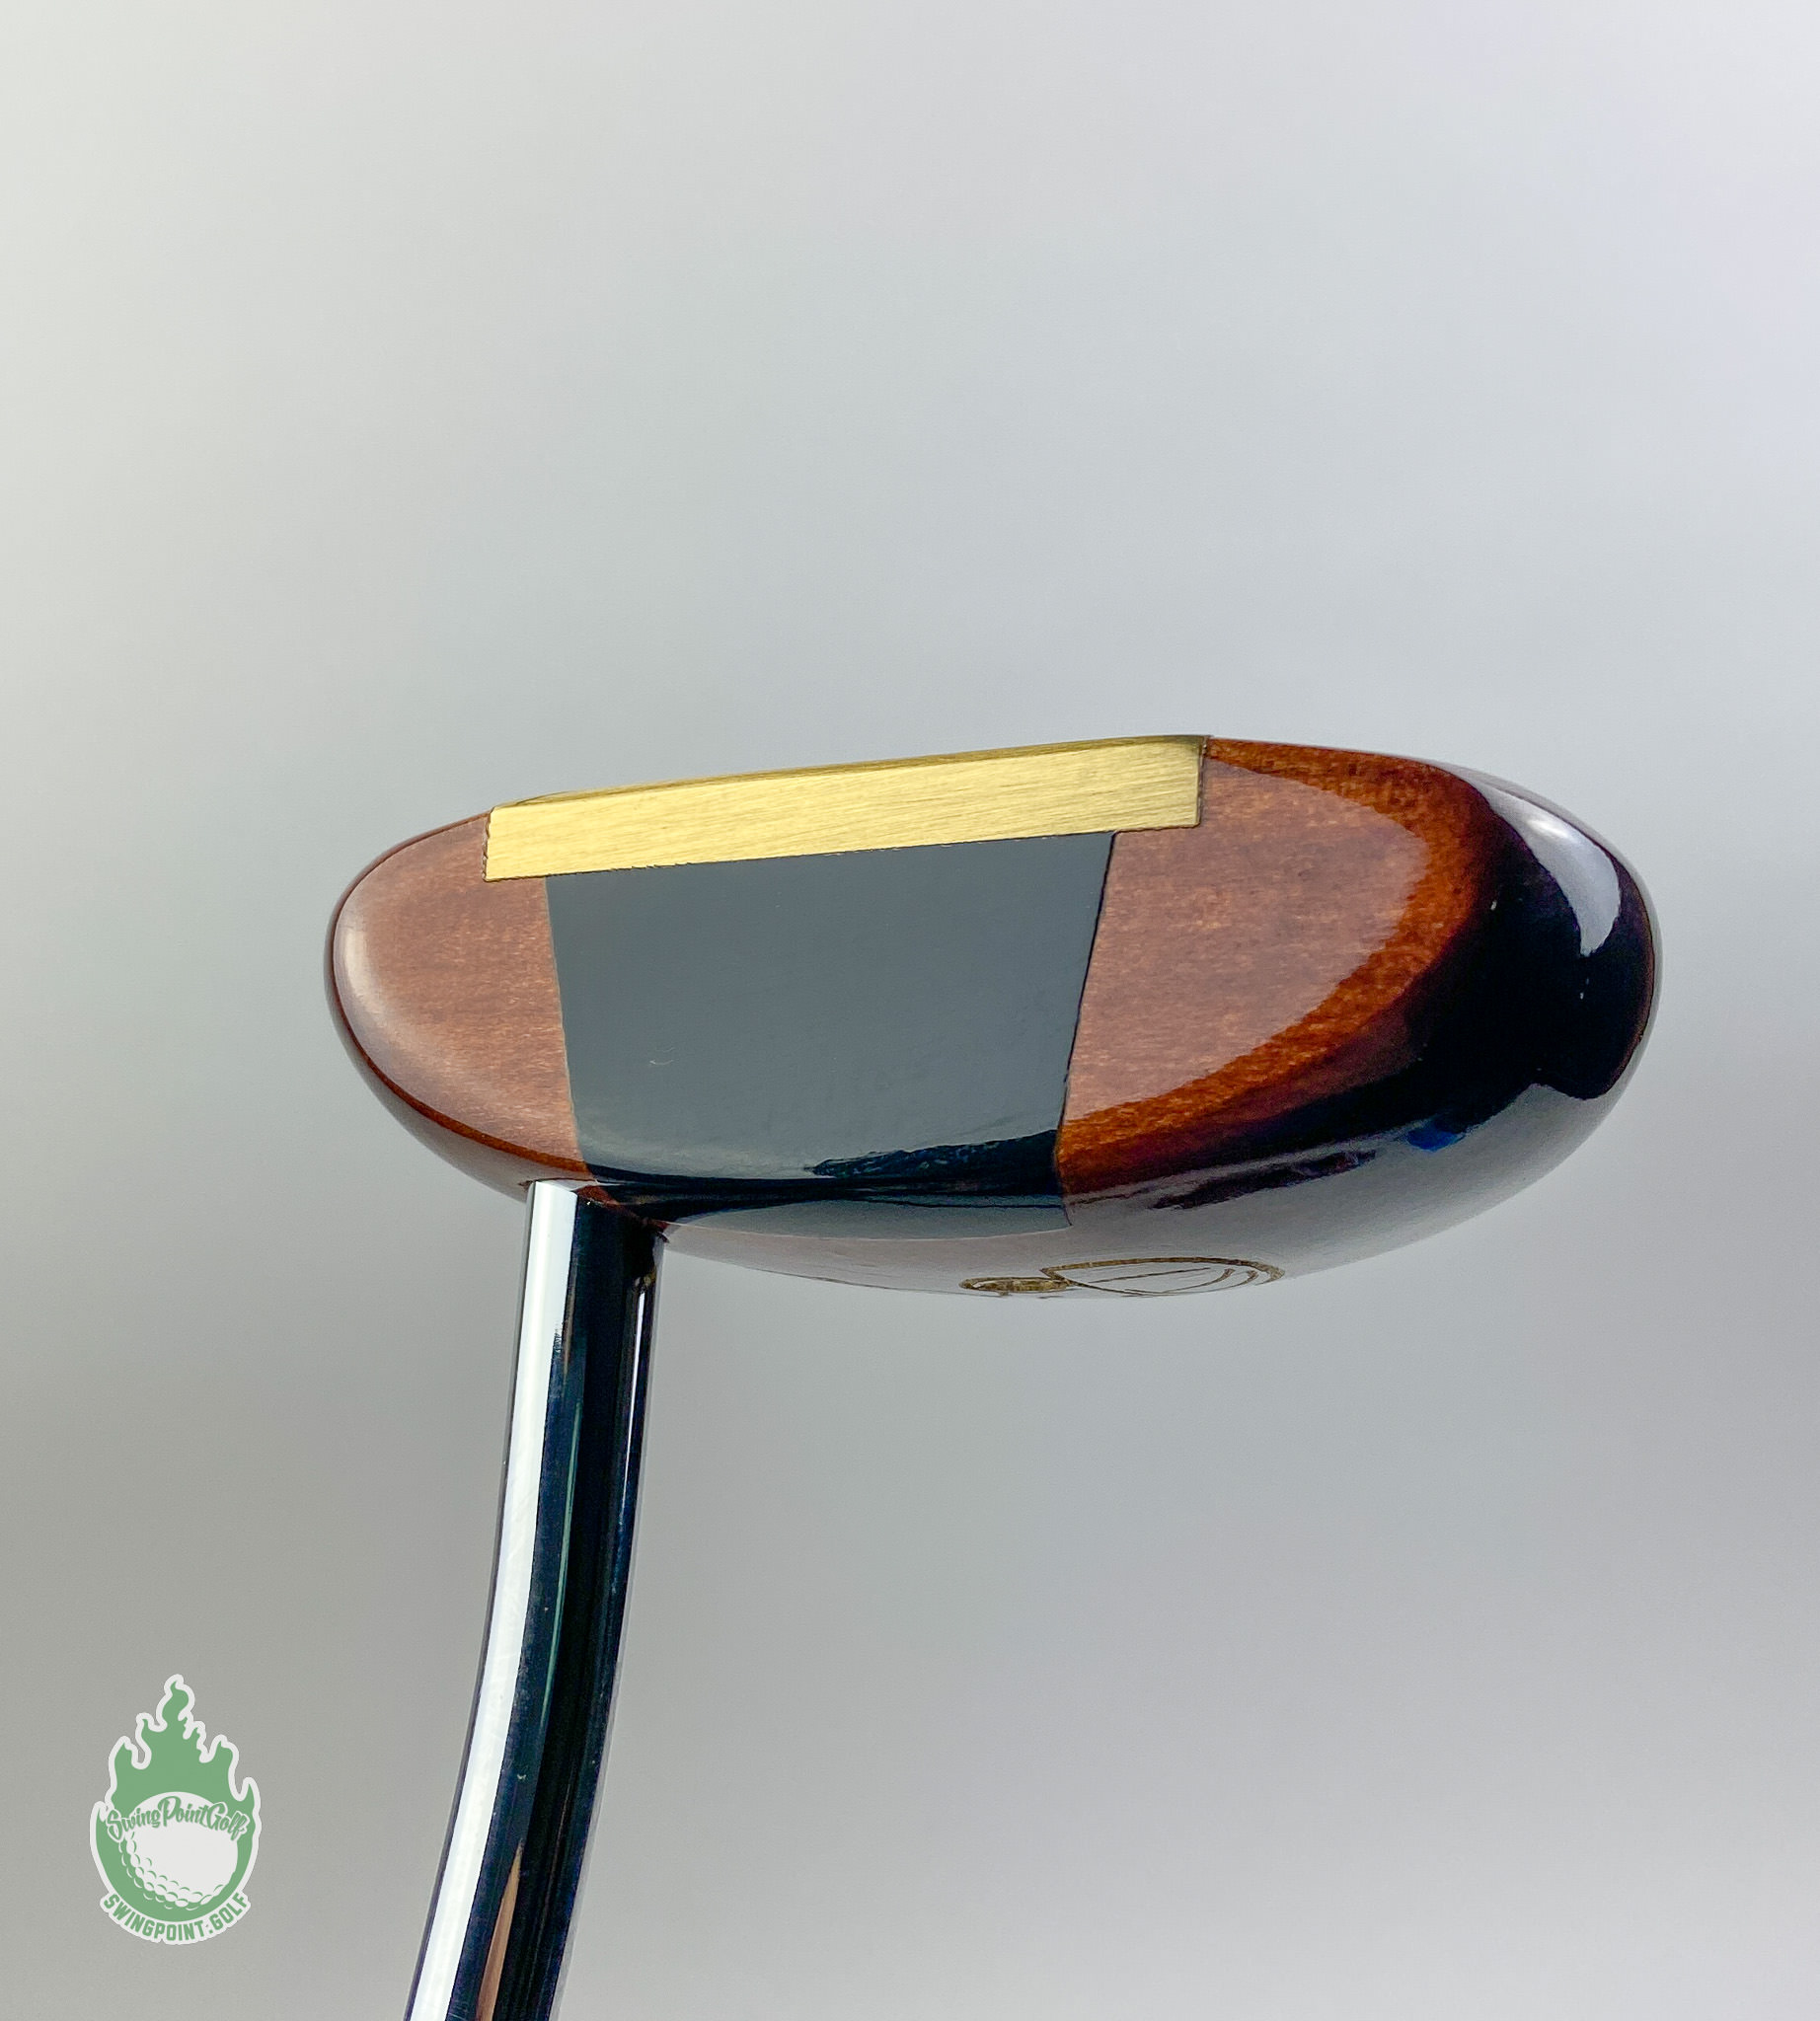 Cherry Wood Golf Ball Marker with Case – Caney Putterworks